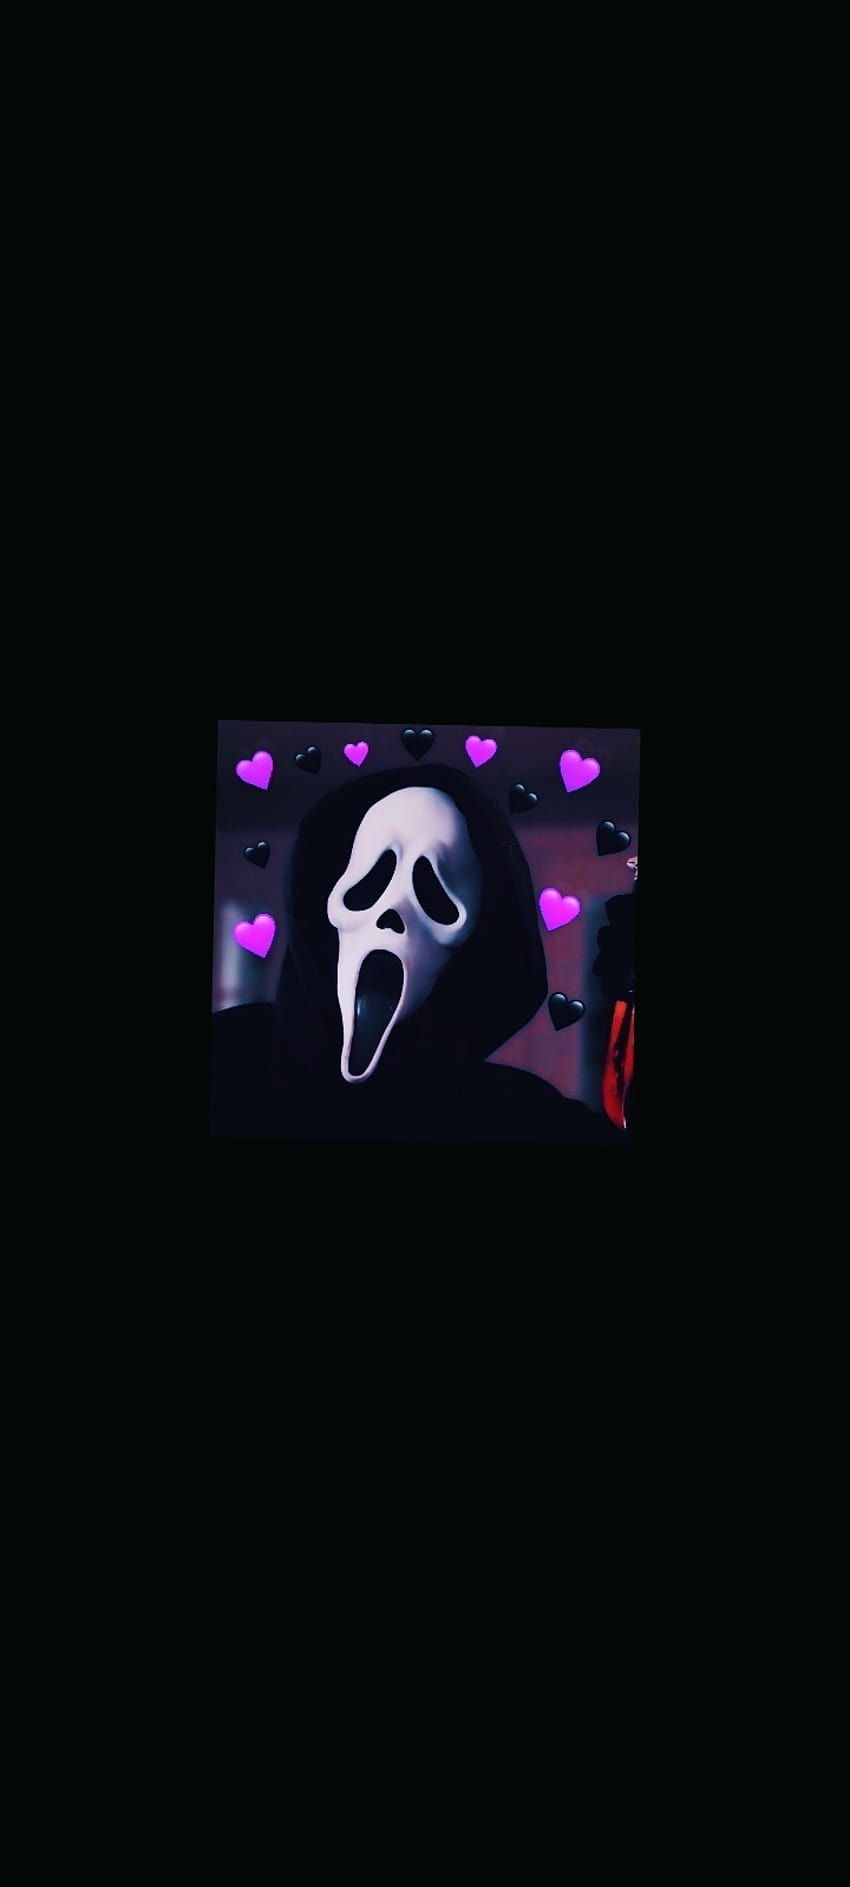 A scary face with hearts in the background - Ghostface